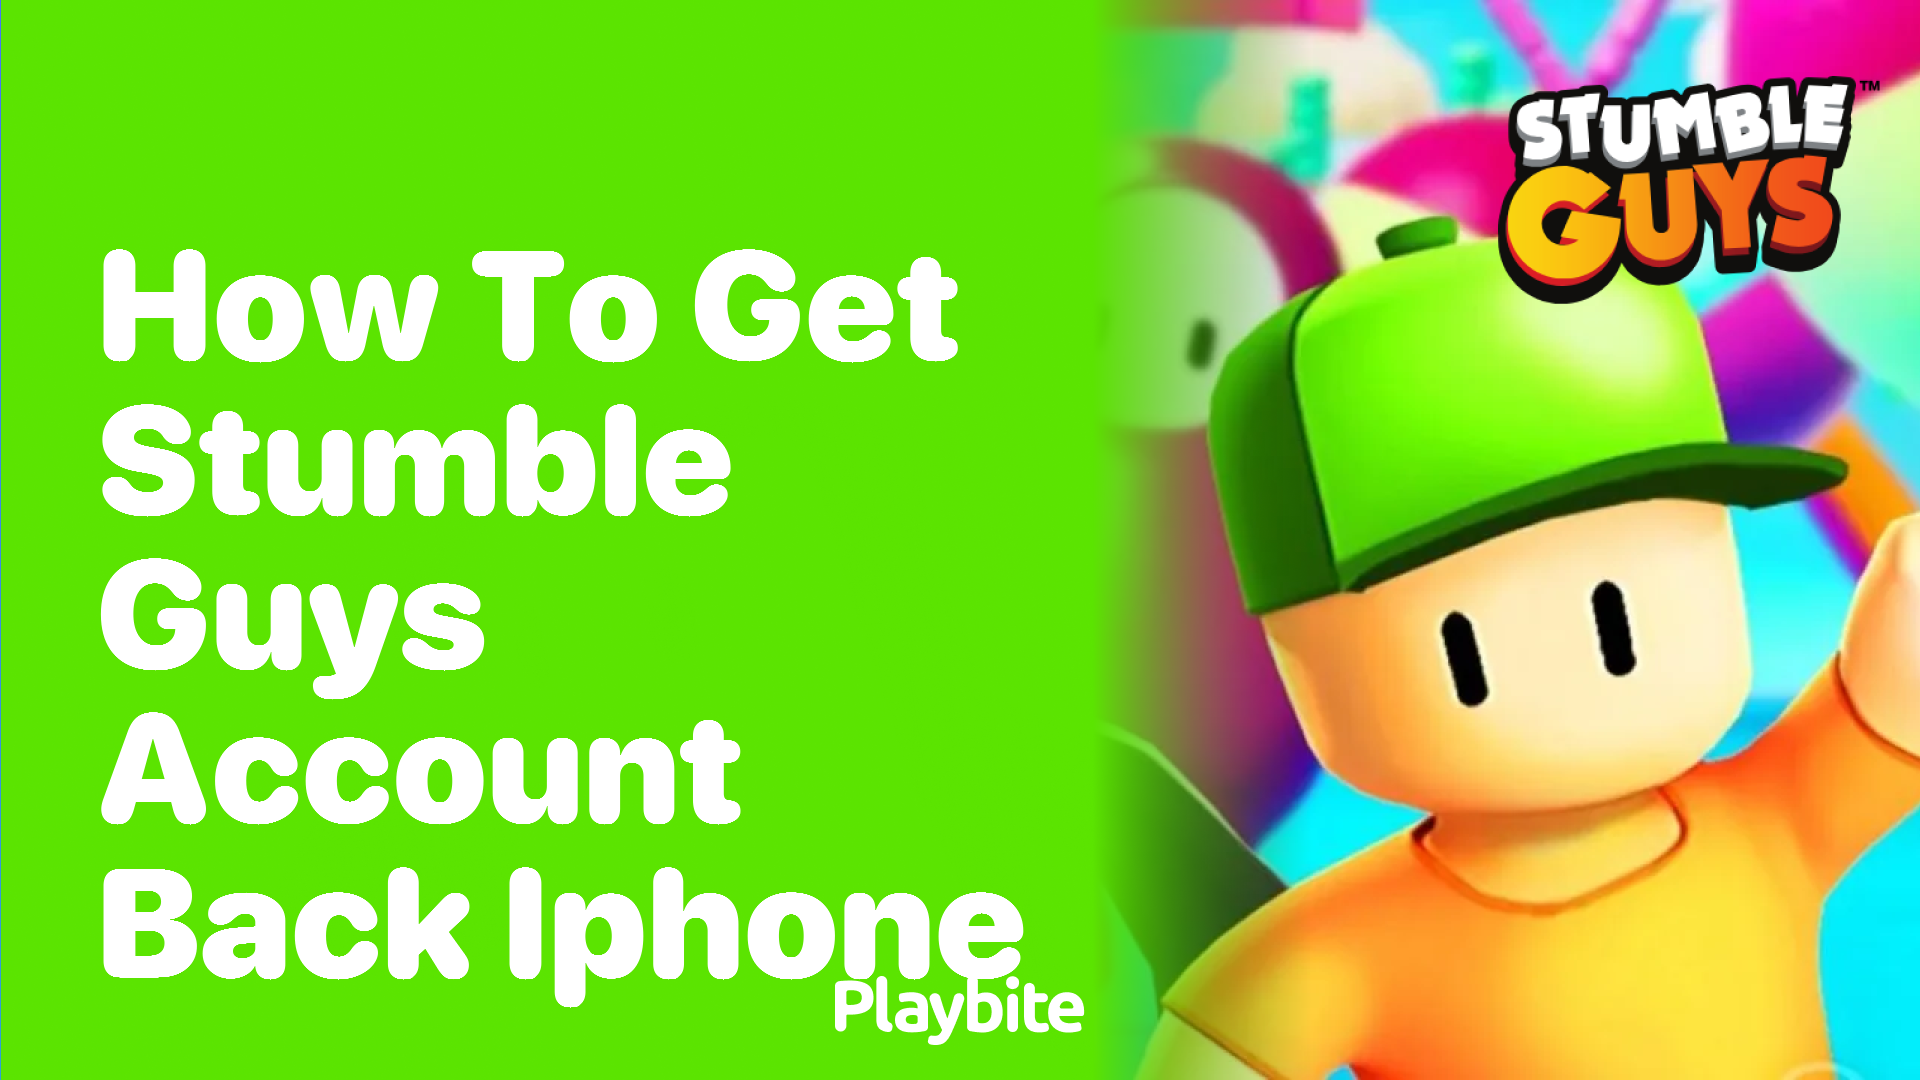 How to Get Your Stumble Guys Account Back on iPhone